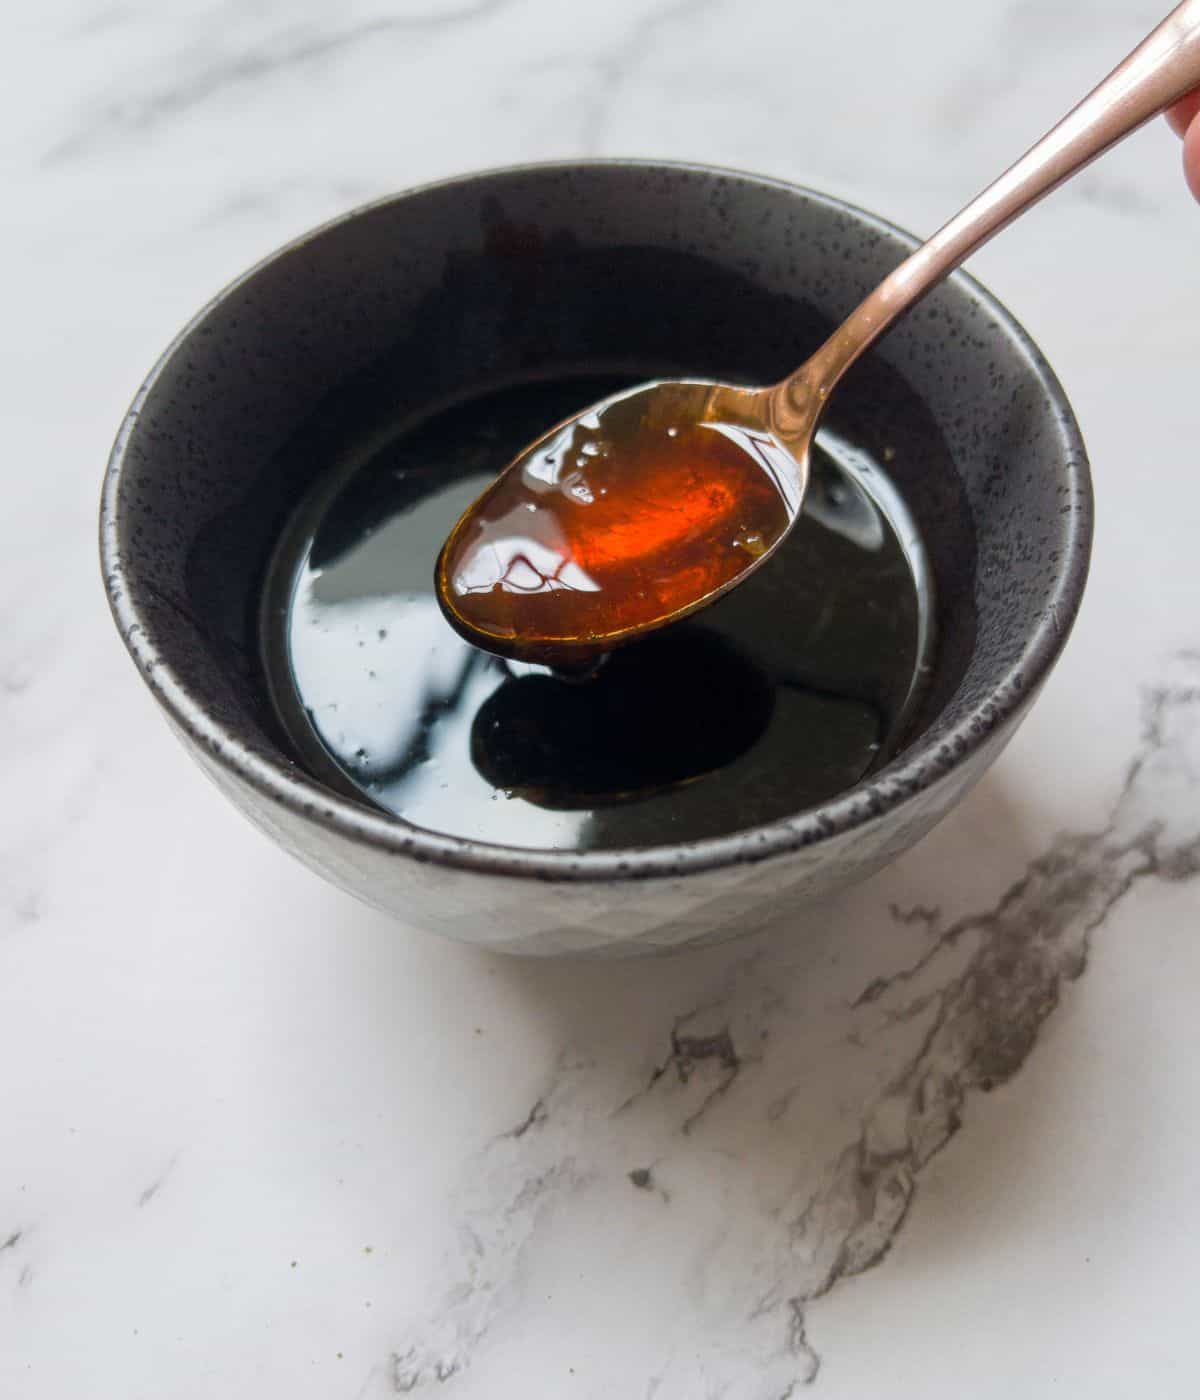 A grey bowl of chinese stir fry sauce with a spoon in it.